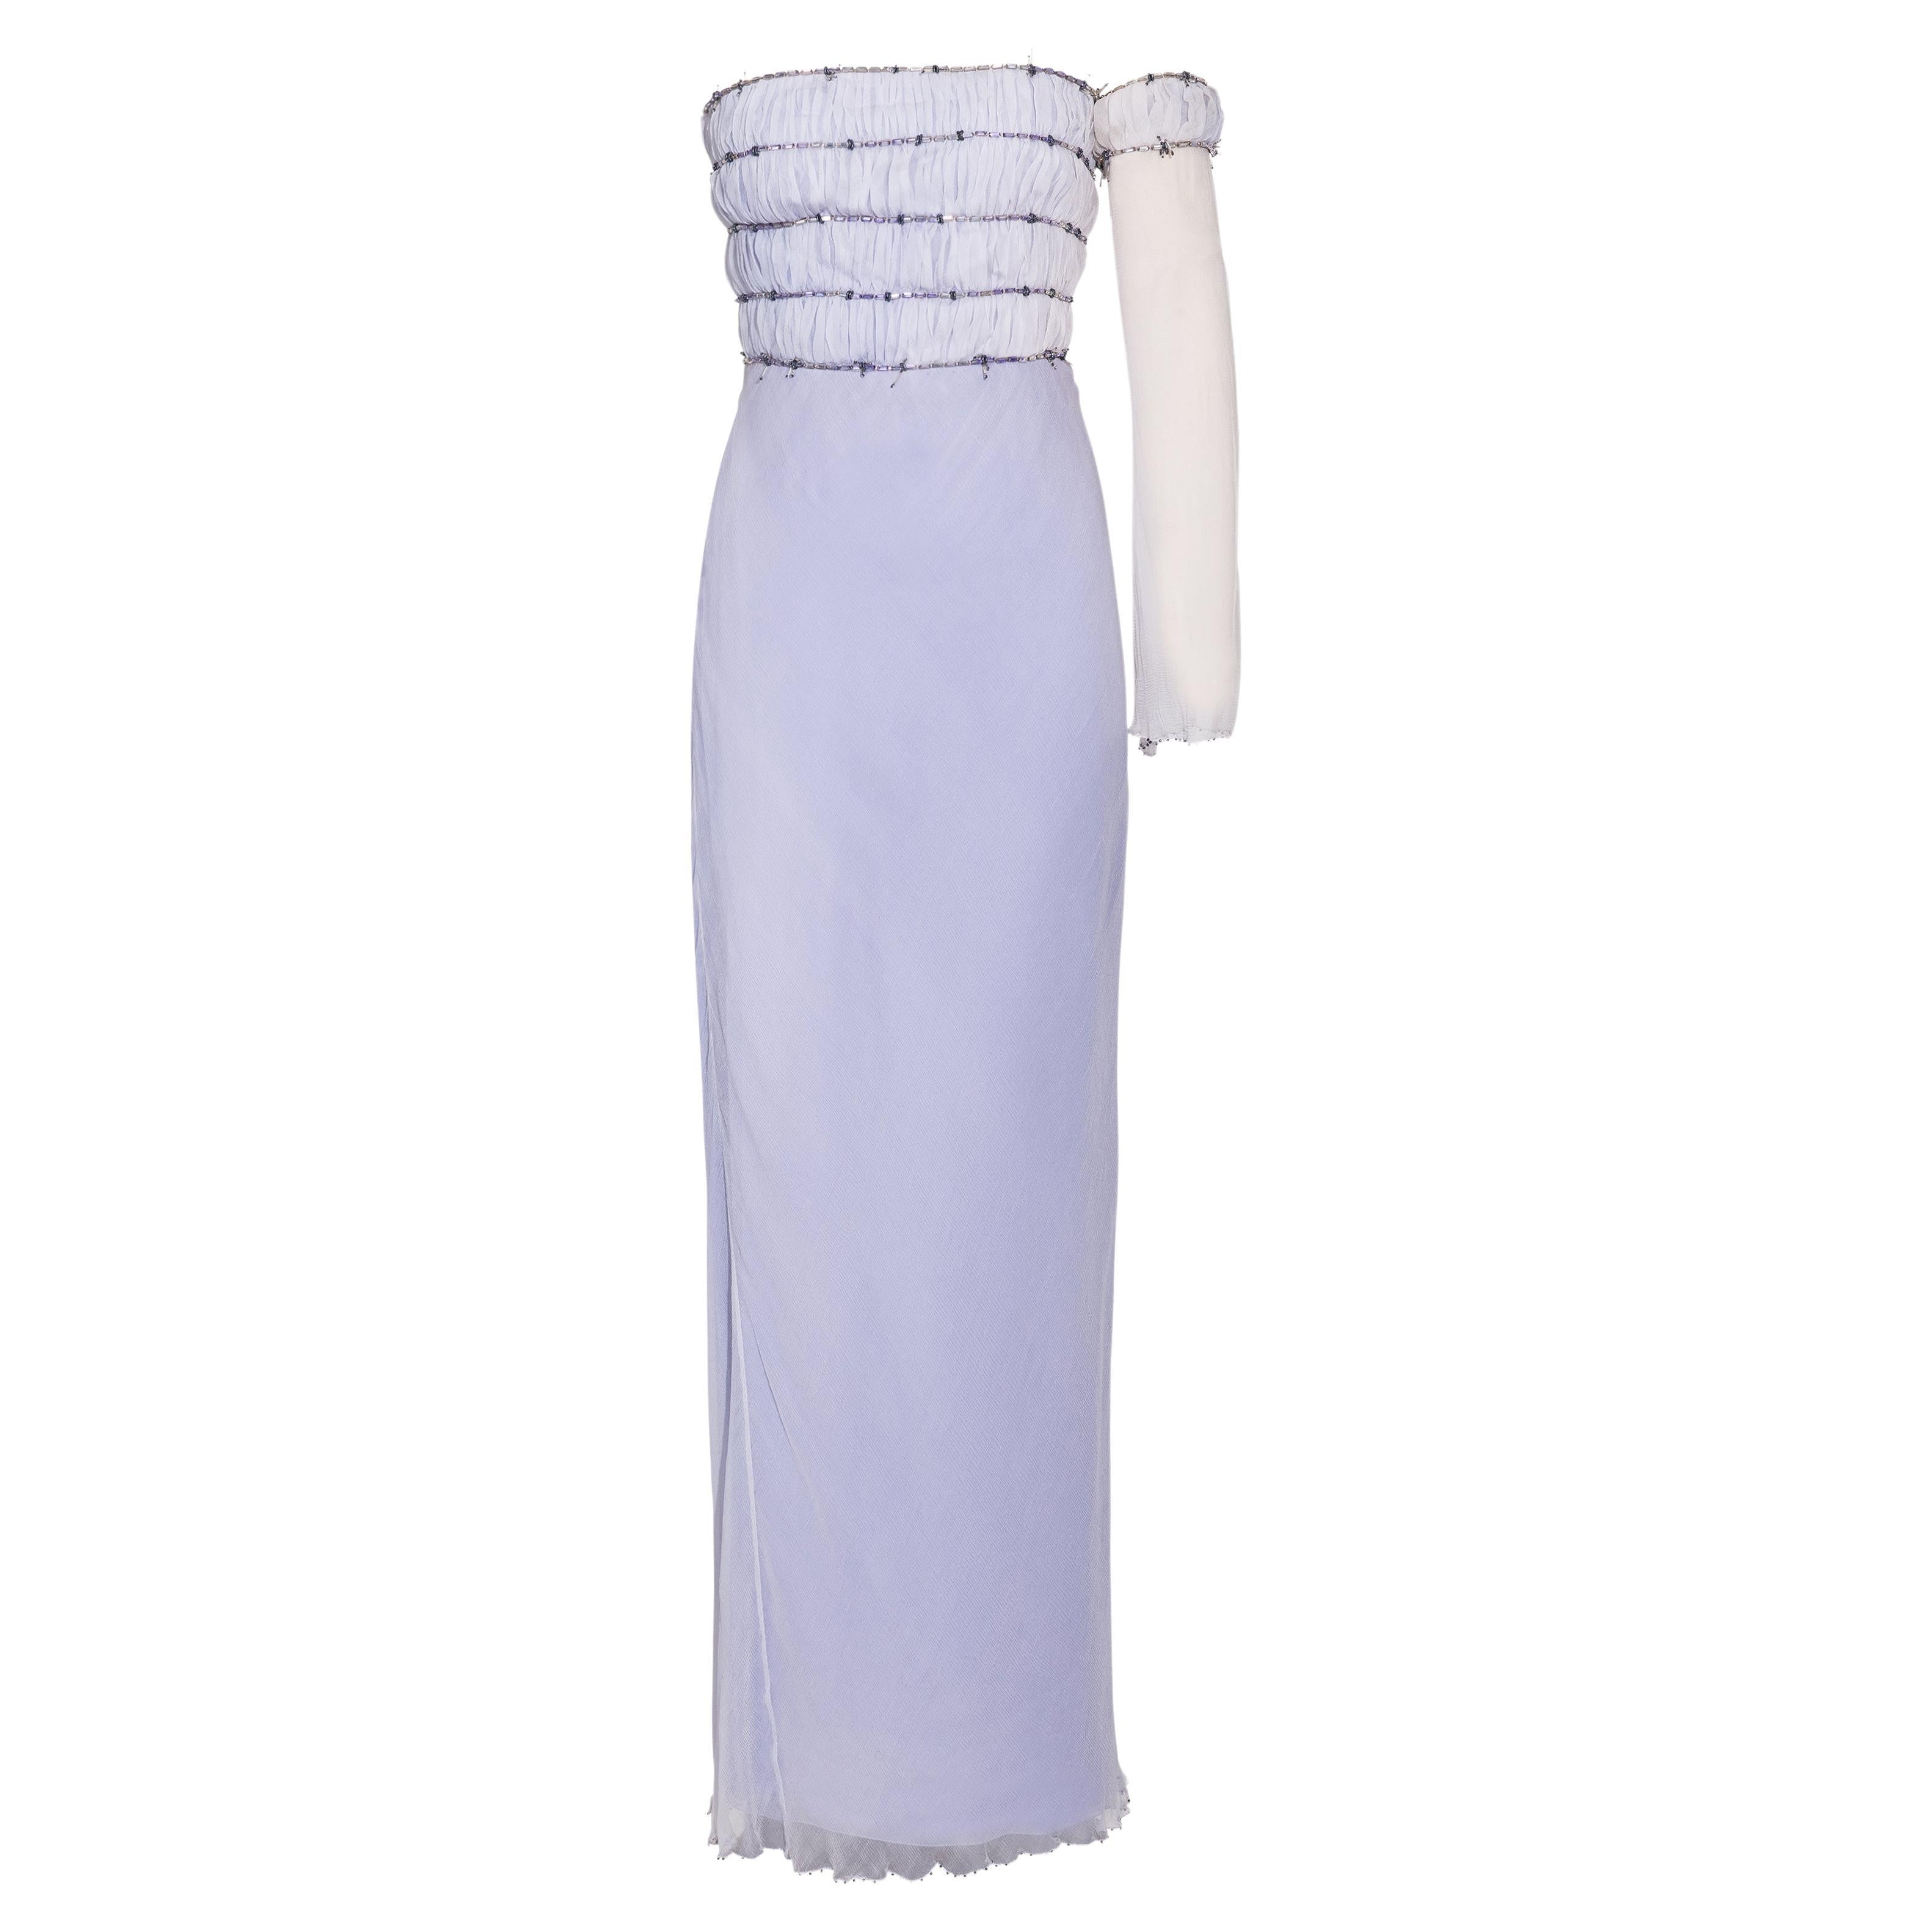 A/W 1998 Gianni Versace Lilac Strapless One-Shoulder 'Barbed Wire' Gown